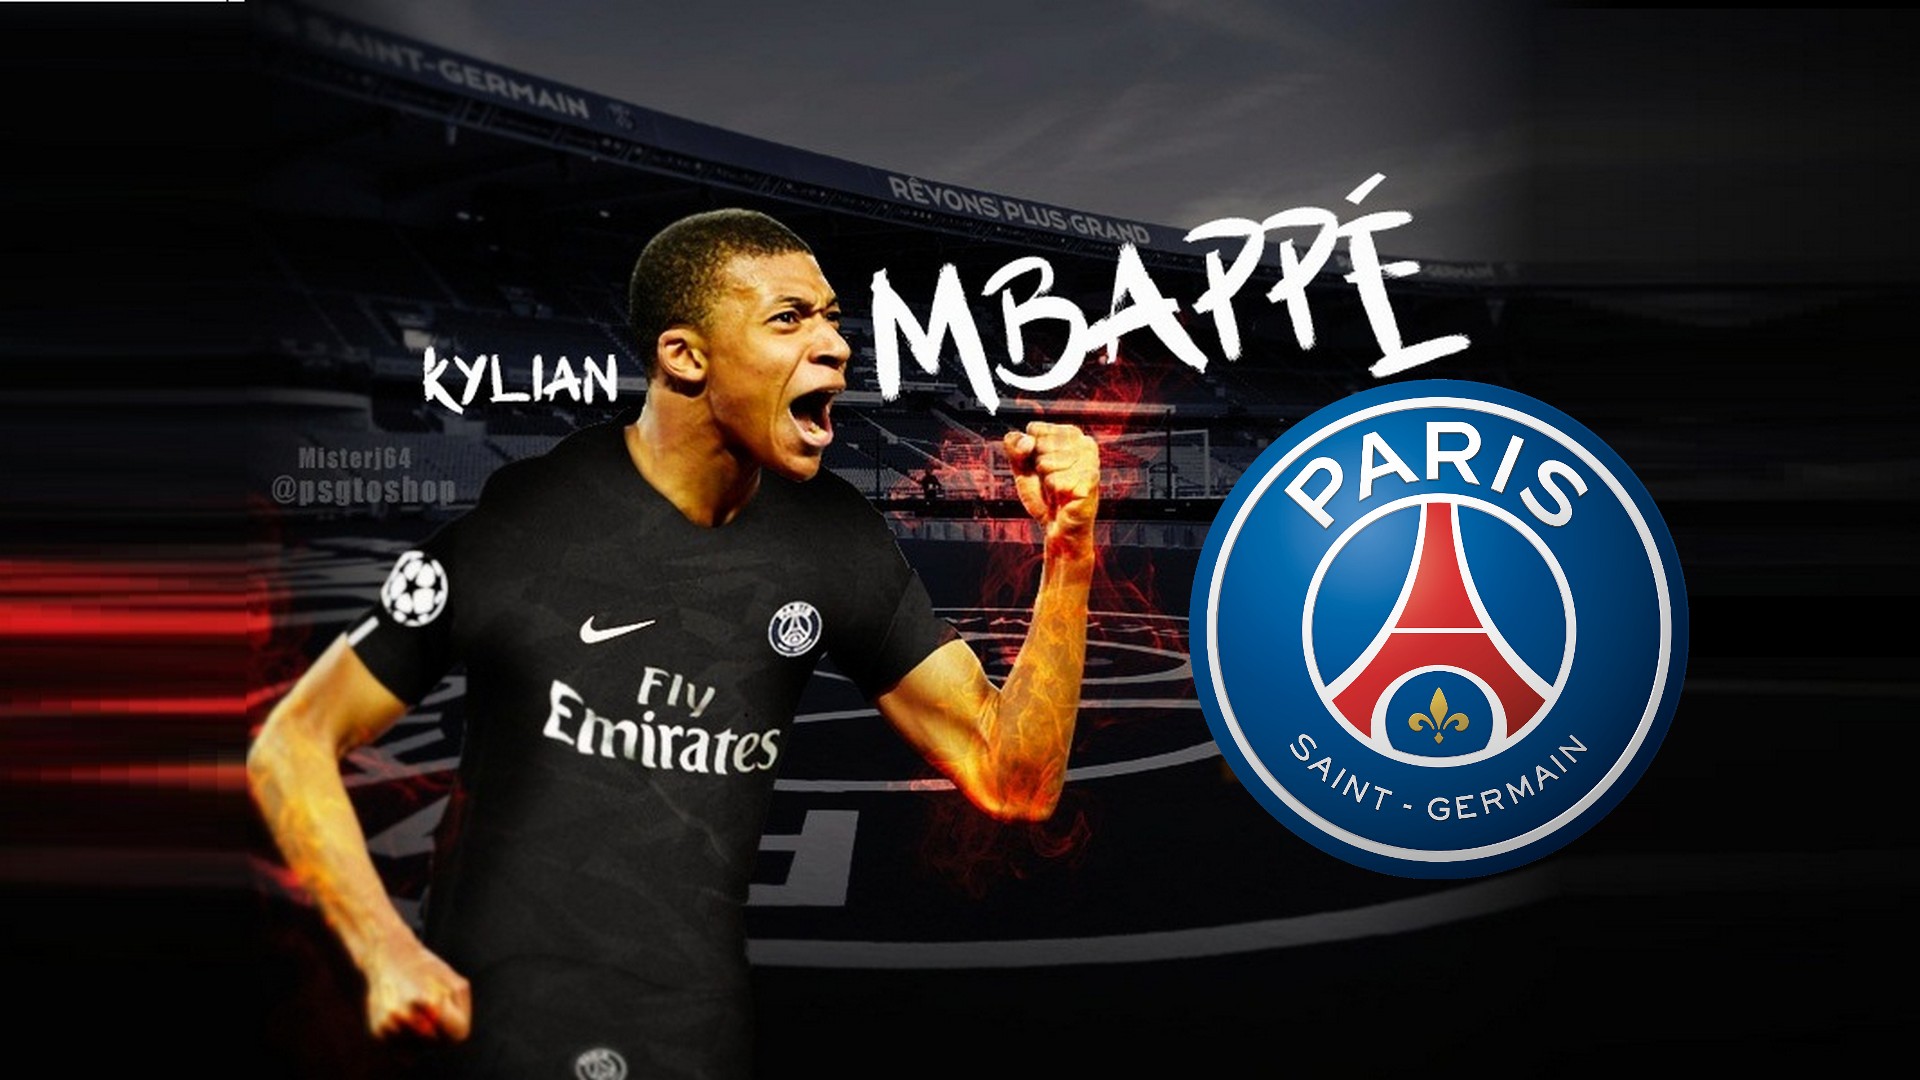 PSG Kylian Mbappe Mac Backgrounds With Resolution 1920X1080 pixel. You can make this wallpaper for your Mac or Windows Desktop Background, iPhone, Android or Tablet and another Smartphone device for free